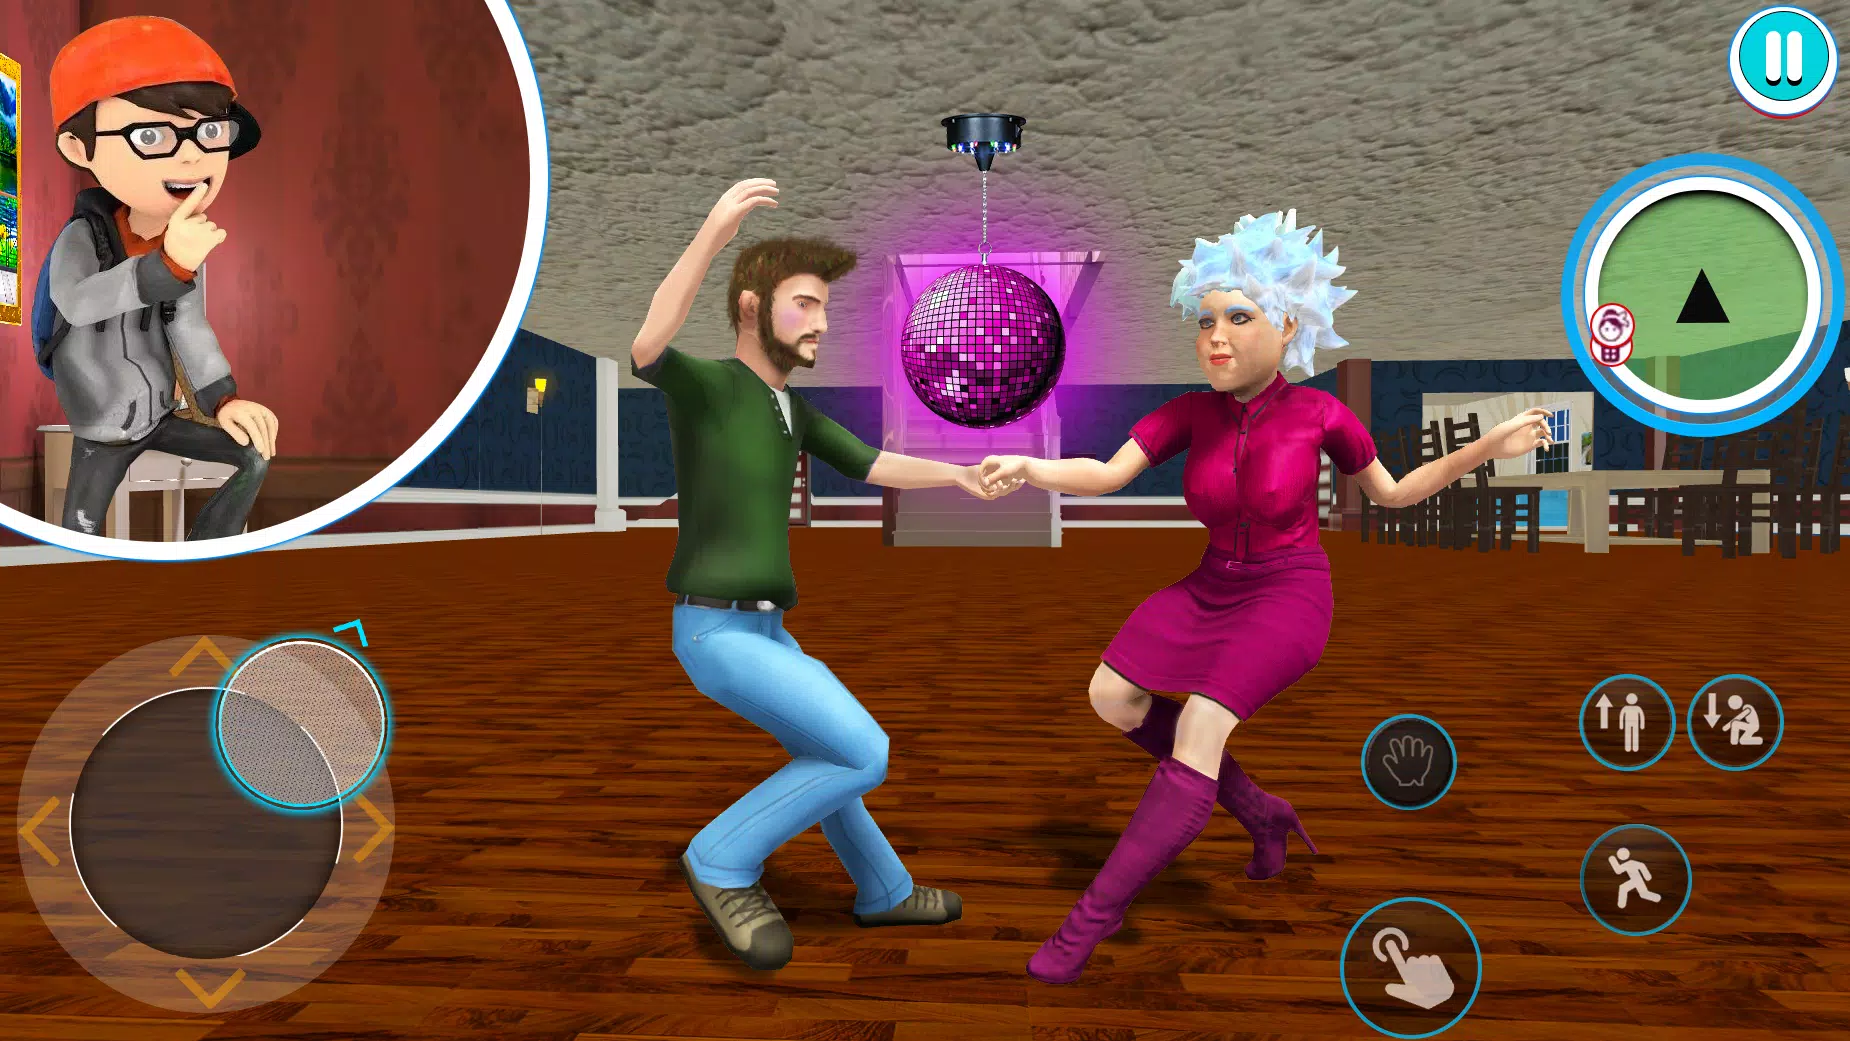 Scary Ghost Teacher 3D - Fun Scary Games - APK Download for Android